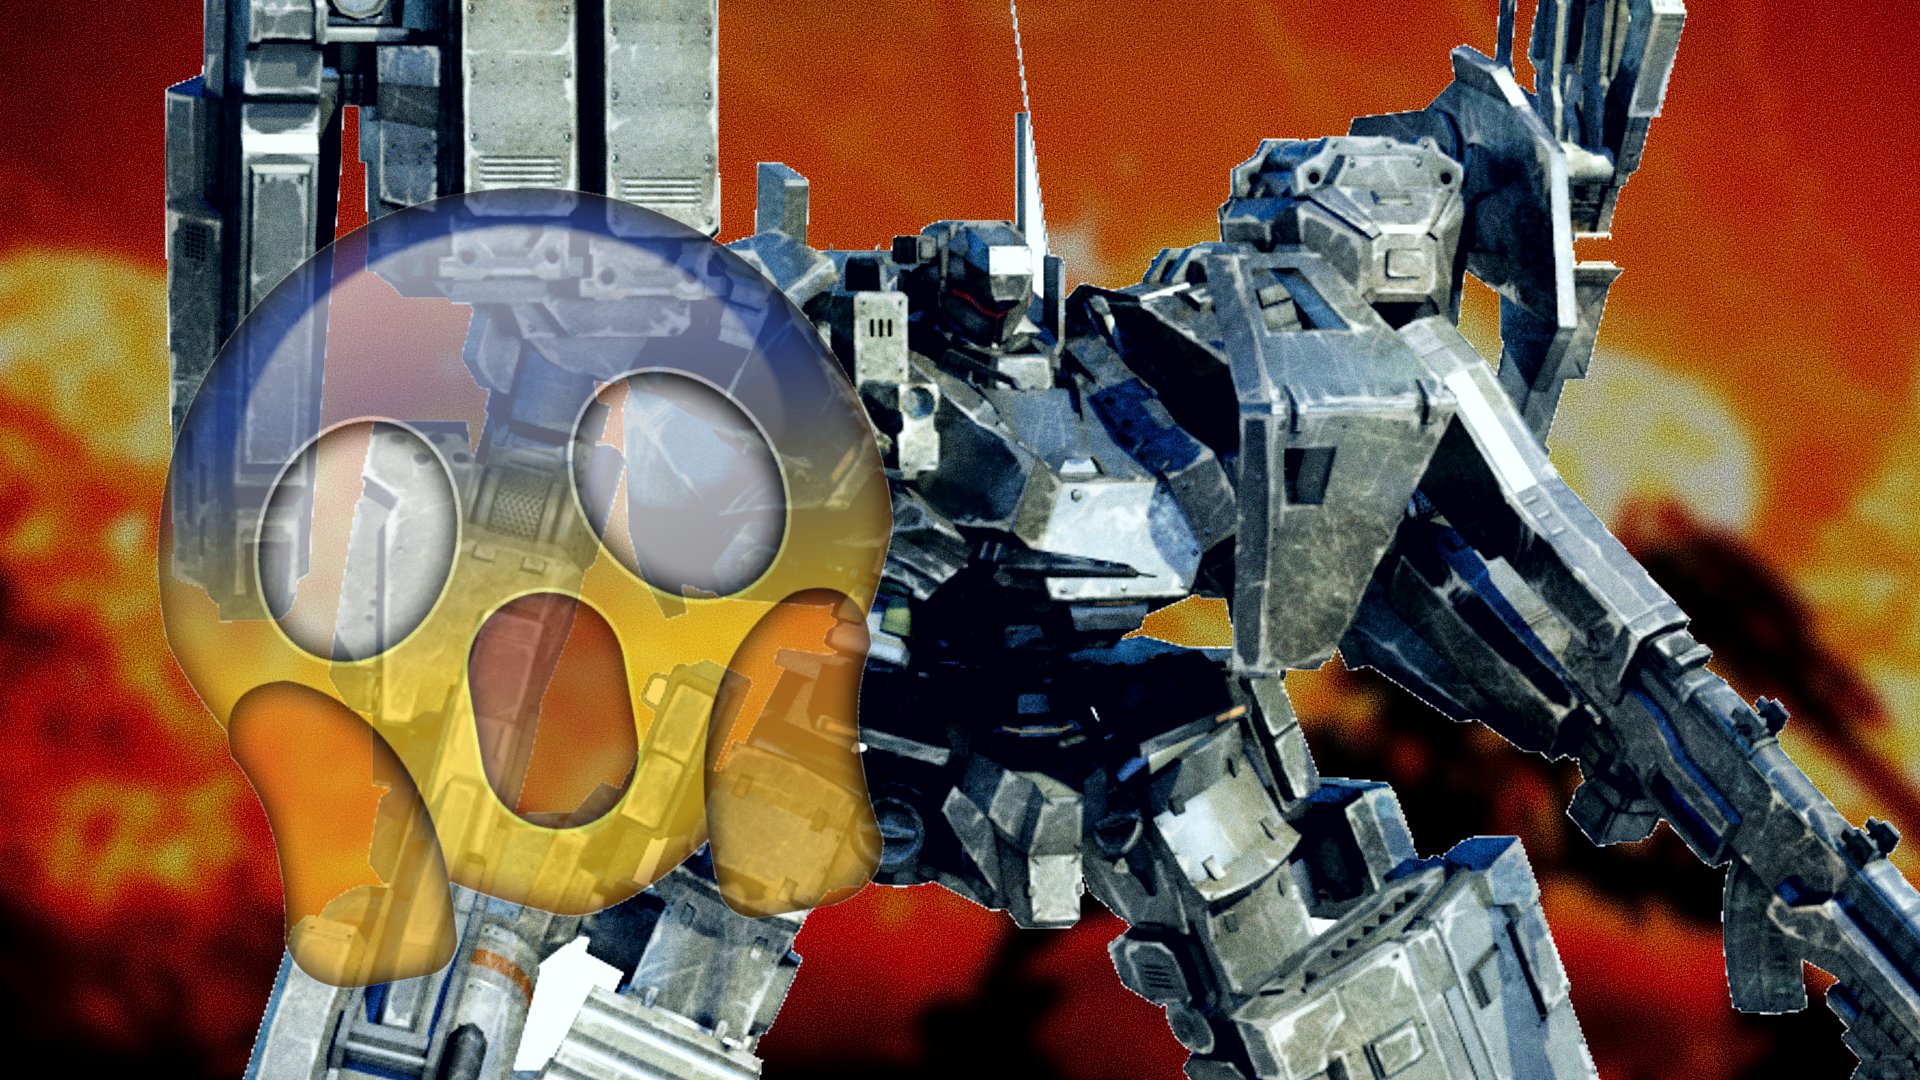 Armored Core 6 pre-order guide: standard, deluxe, collector's, and